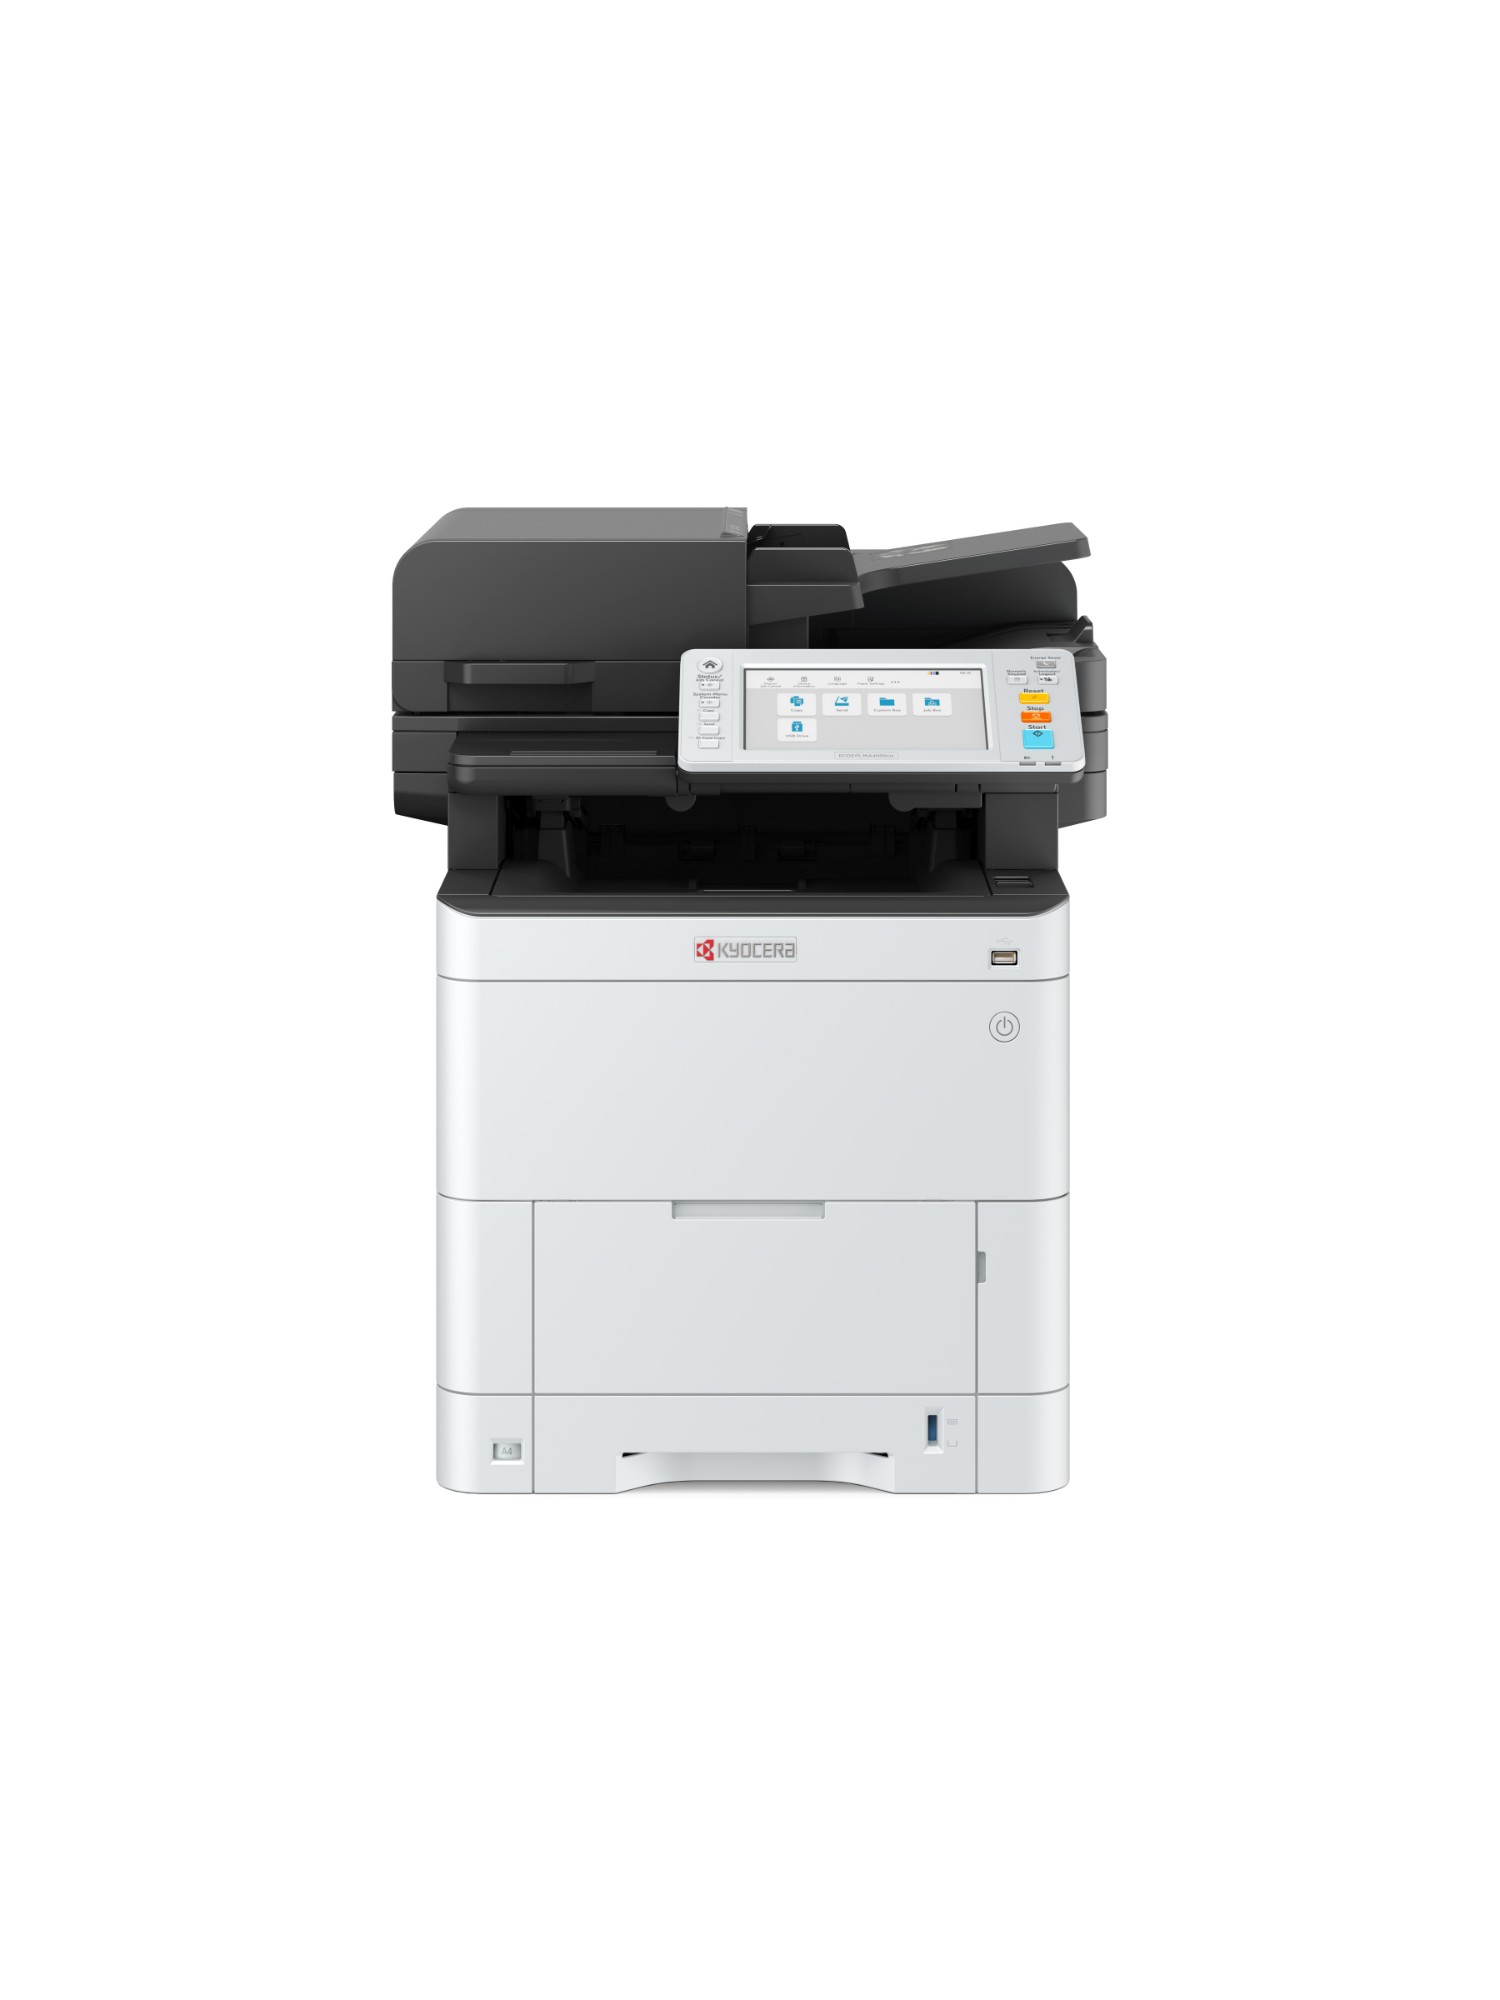 Photos - All-in-One Printer Kyocera ECOSYS MA4000cix Laser A4 1200 x 1200 DPI 40 ppm 1102Z43NL0 